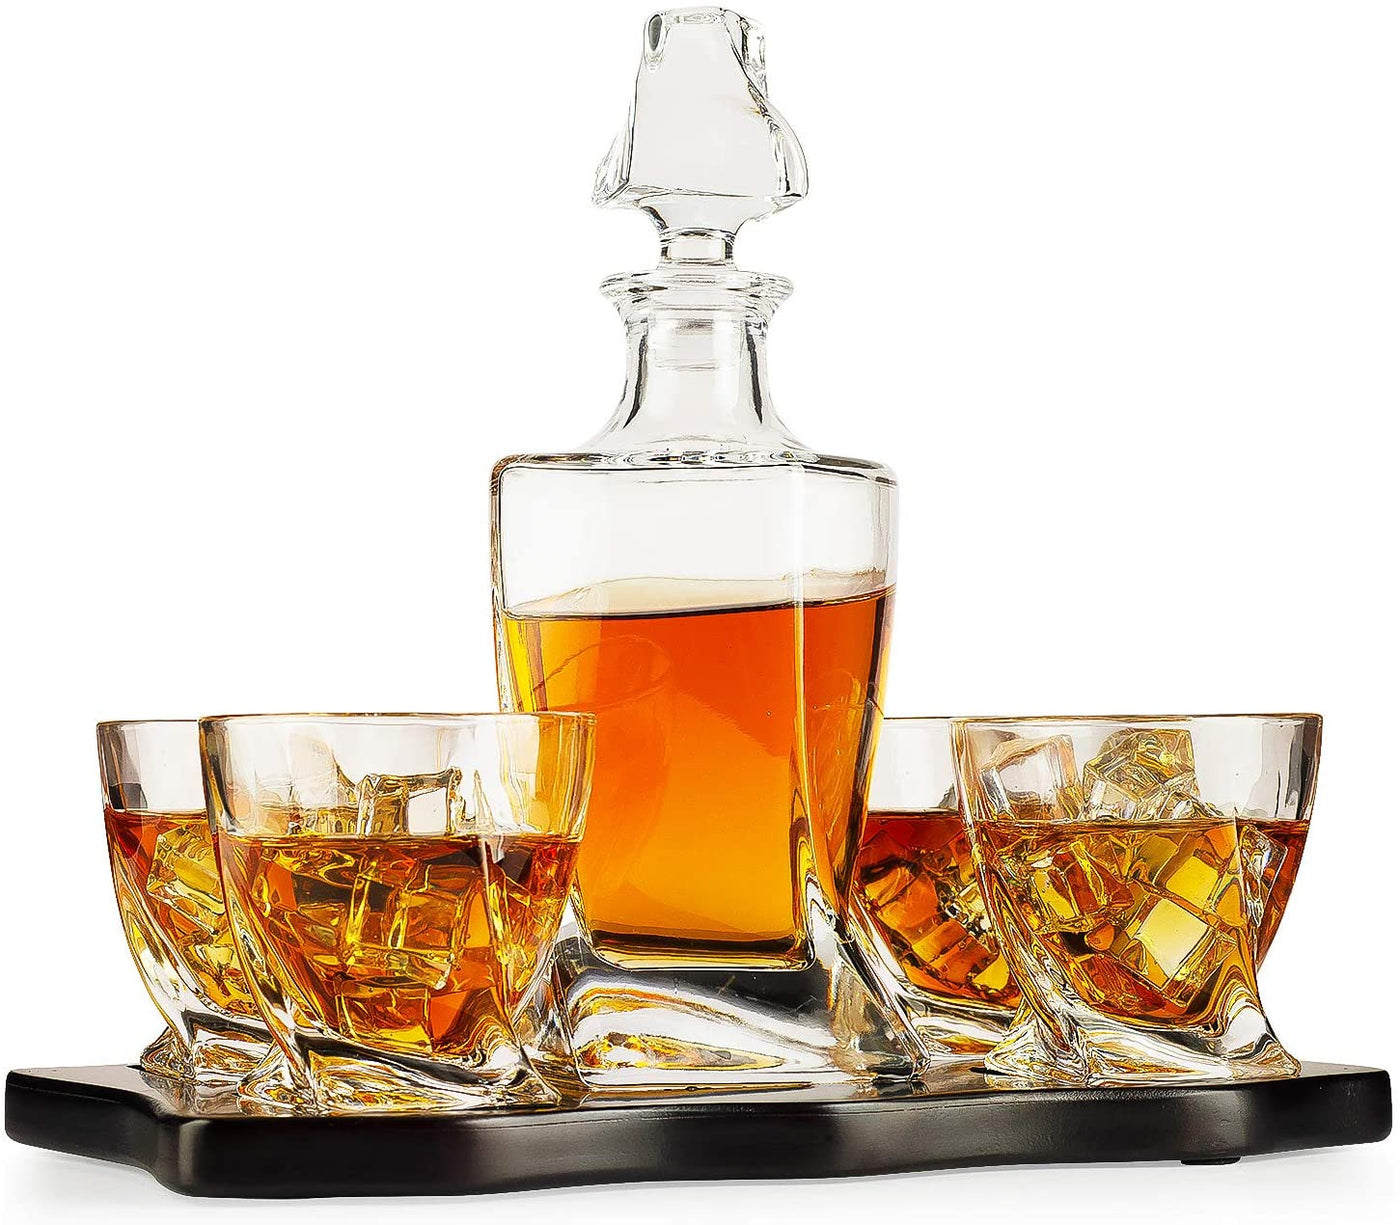 Liquor Lux Italian Crafted Crystal 5 Piece European Style Wine & Whiskey Decanter 855ml with 4 Glasses & Wood Sophisticated Tray Set Spirits, Scotch, & Bourbon Whiskey Decanter Sets for Men